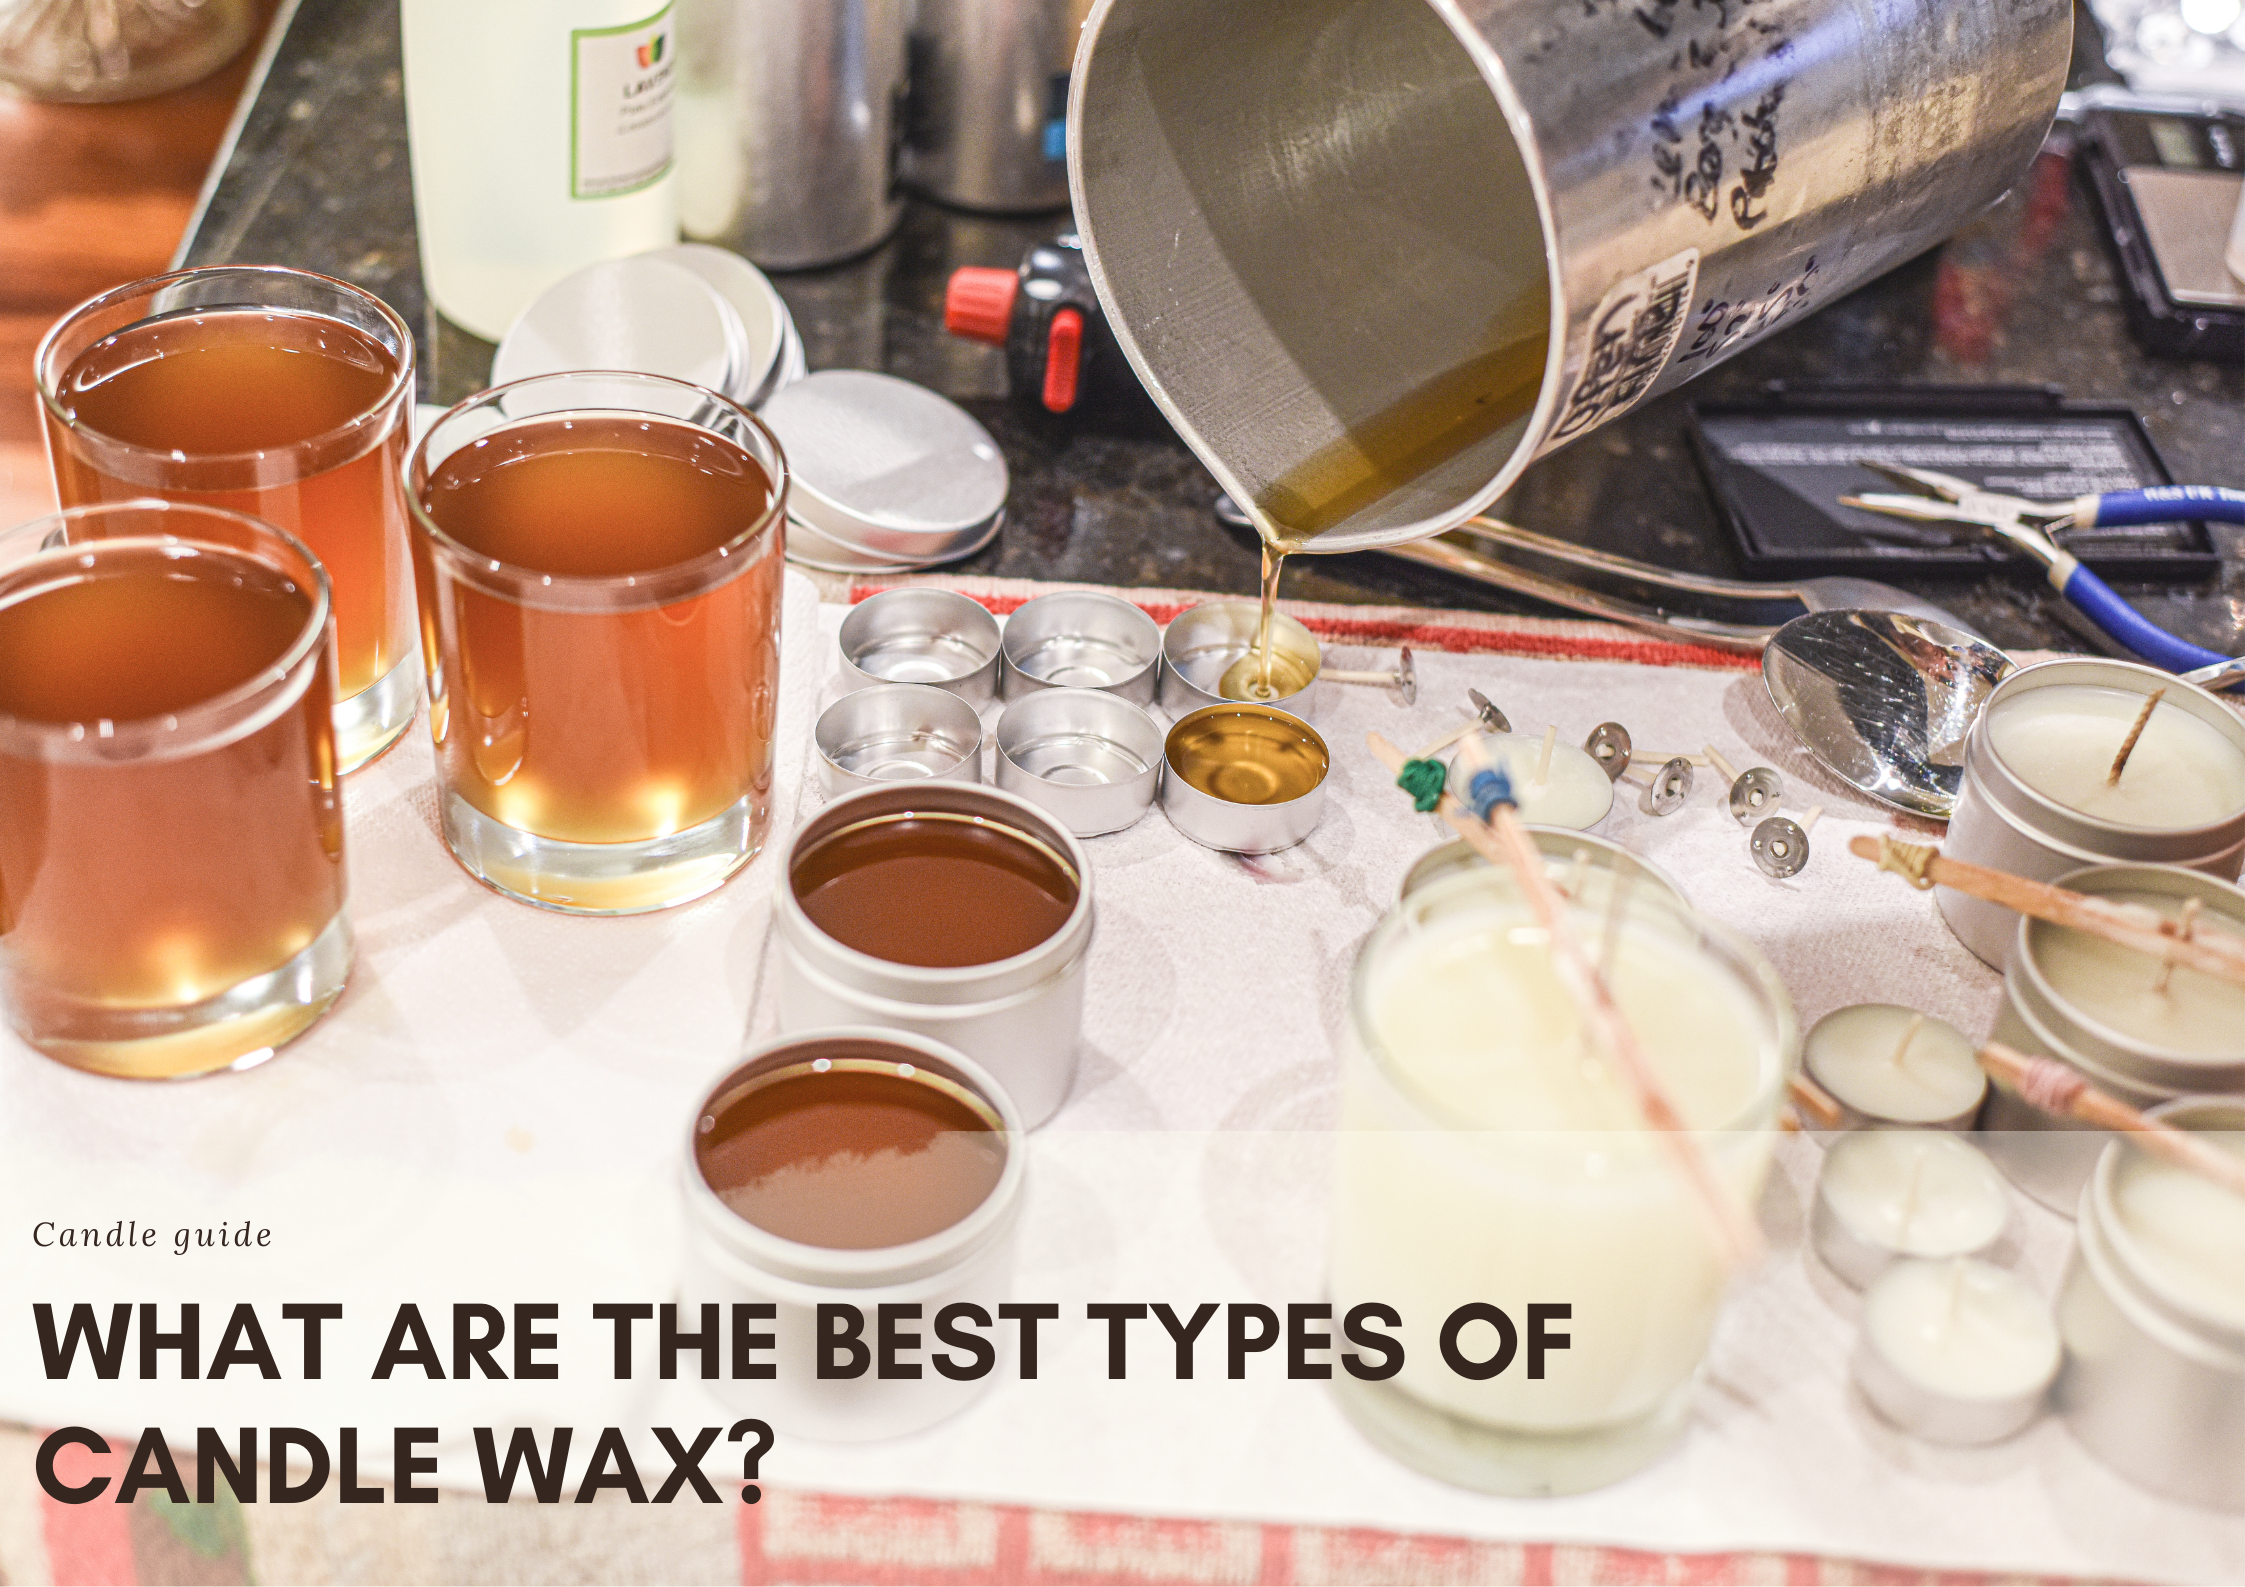 What are the best types of candle wax?